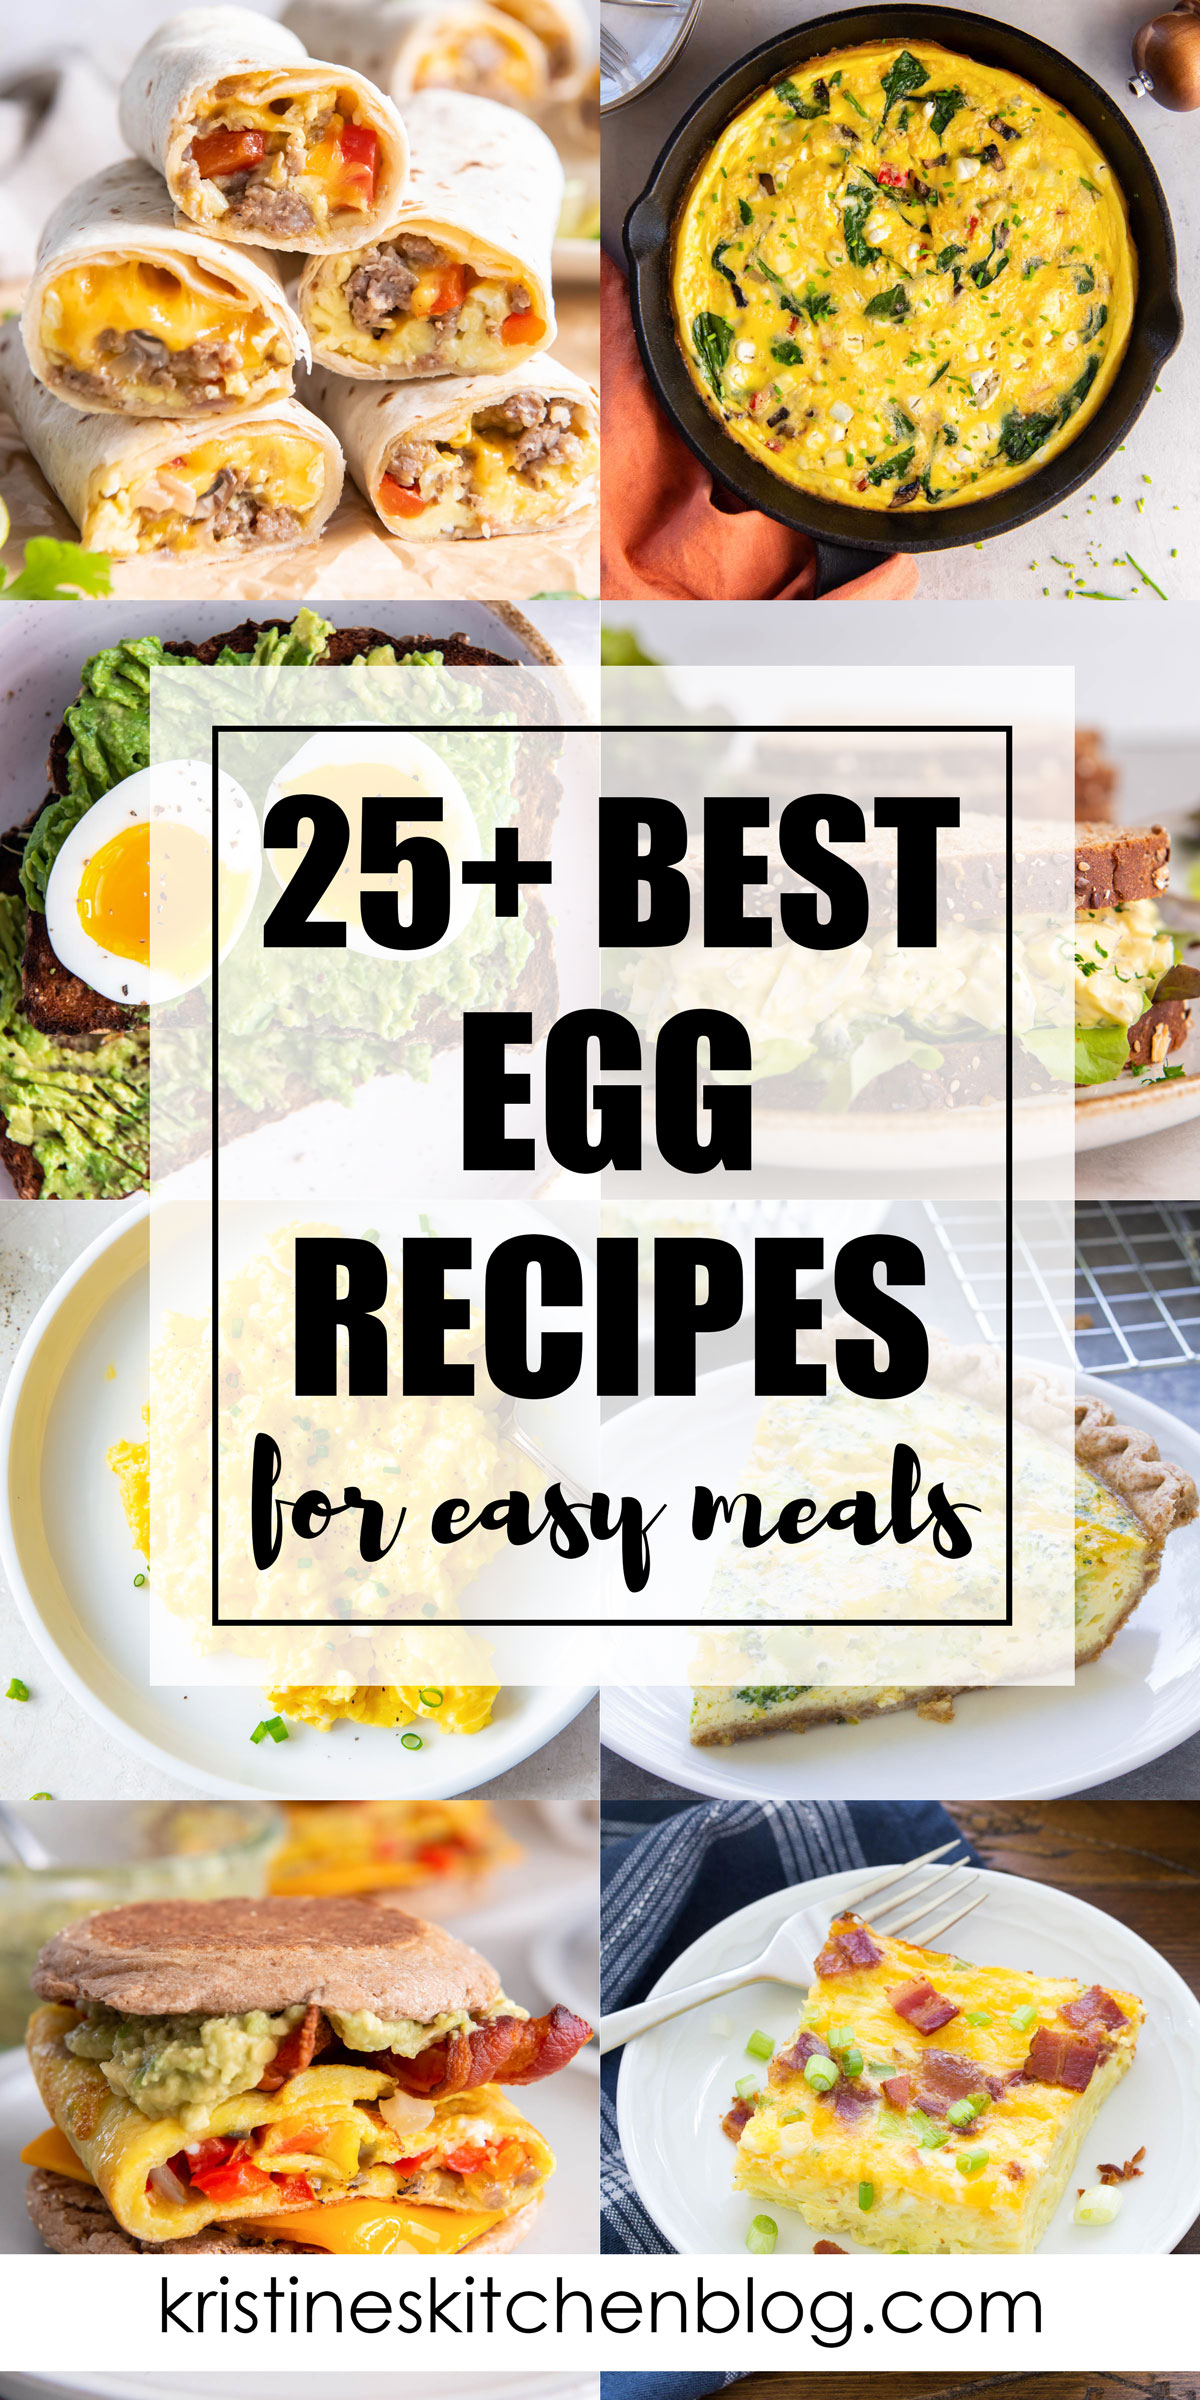 Collage of 8 egg recipes photos with text overlay.